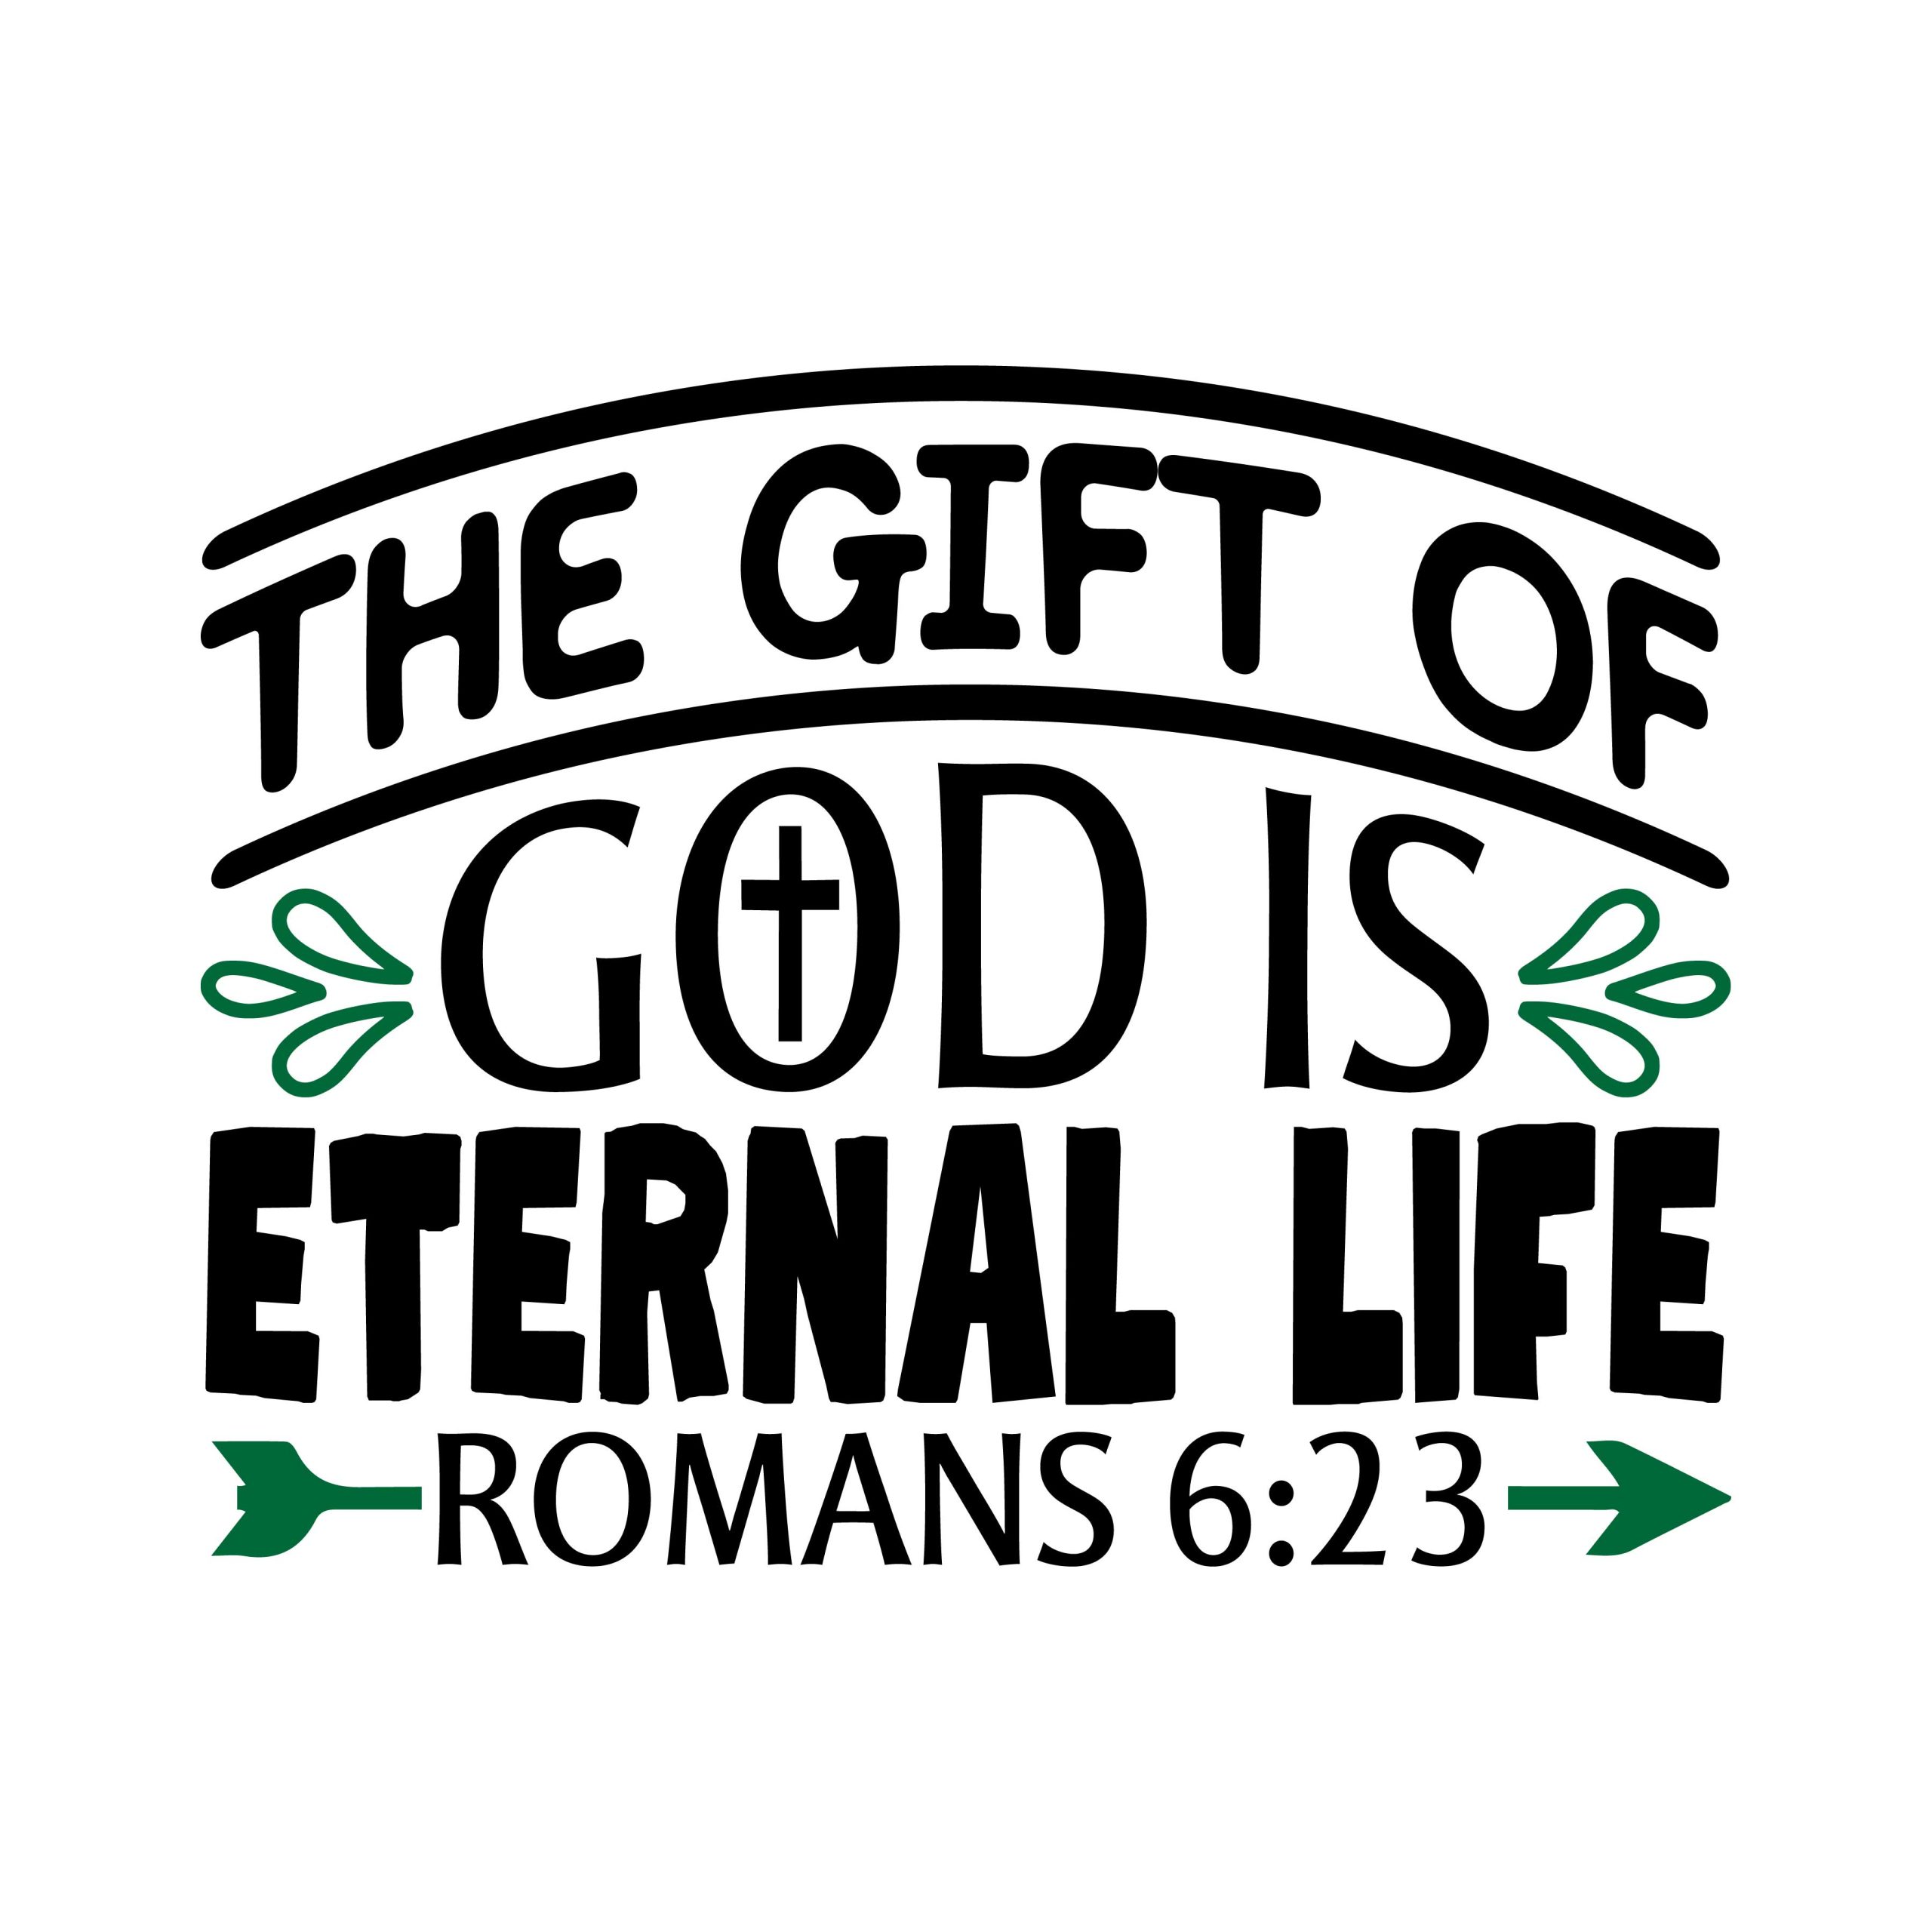 The gift of god is eternal life romans 6:23, bible verses, scripture verses, svg files, passages, sayings, cricut designs, silhouette, embroidery, bundle, free cut files, design space, vector